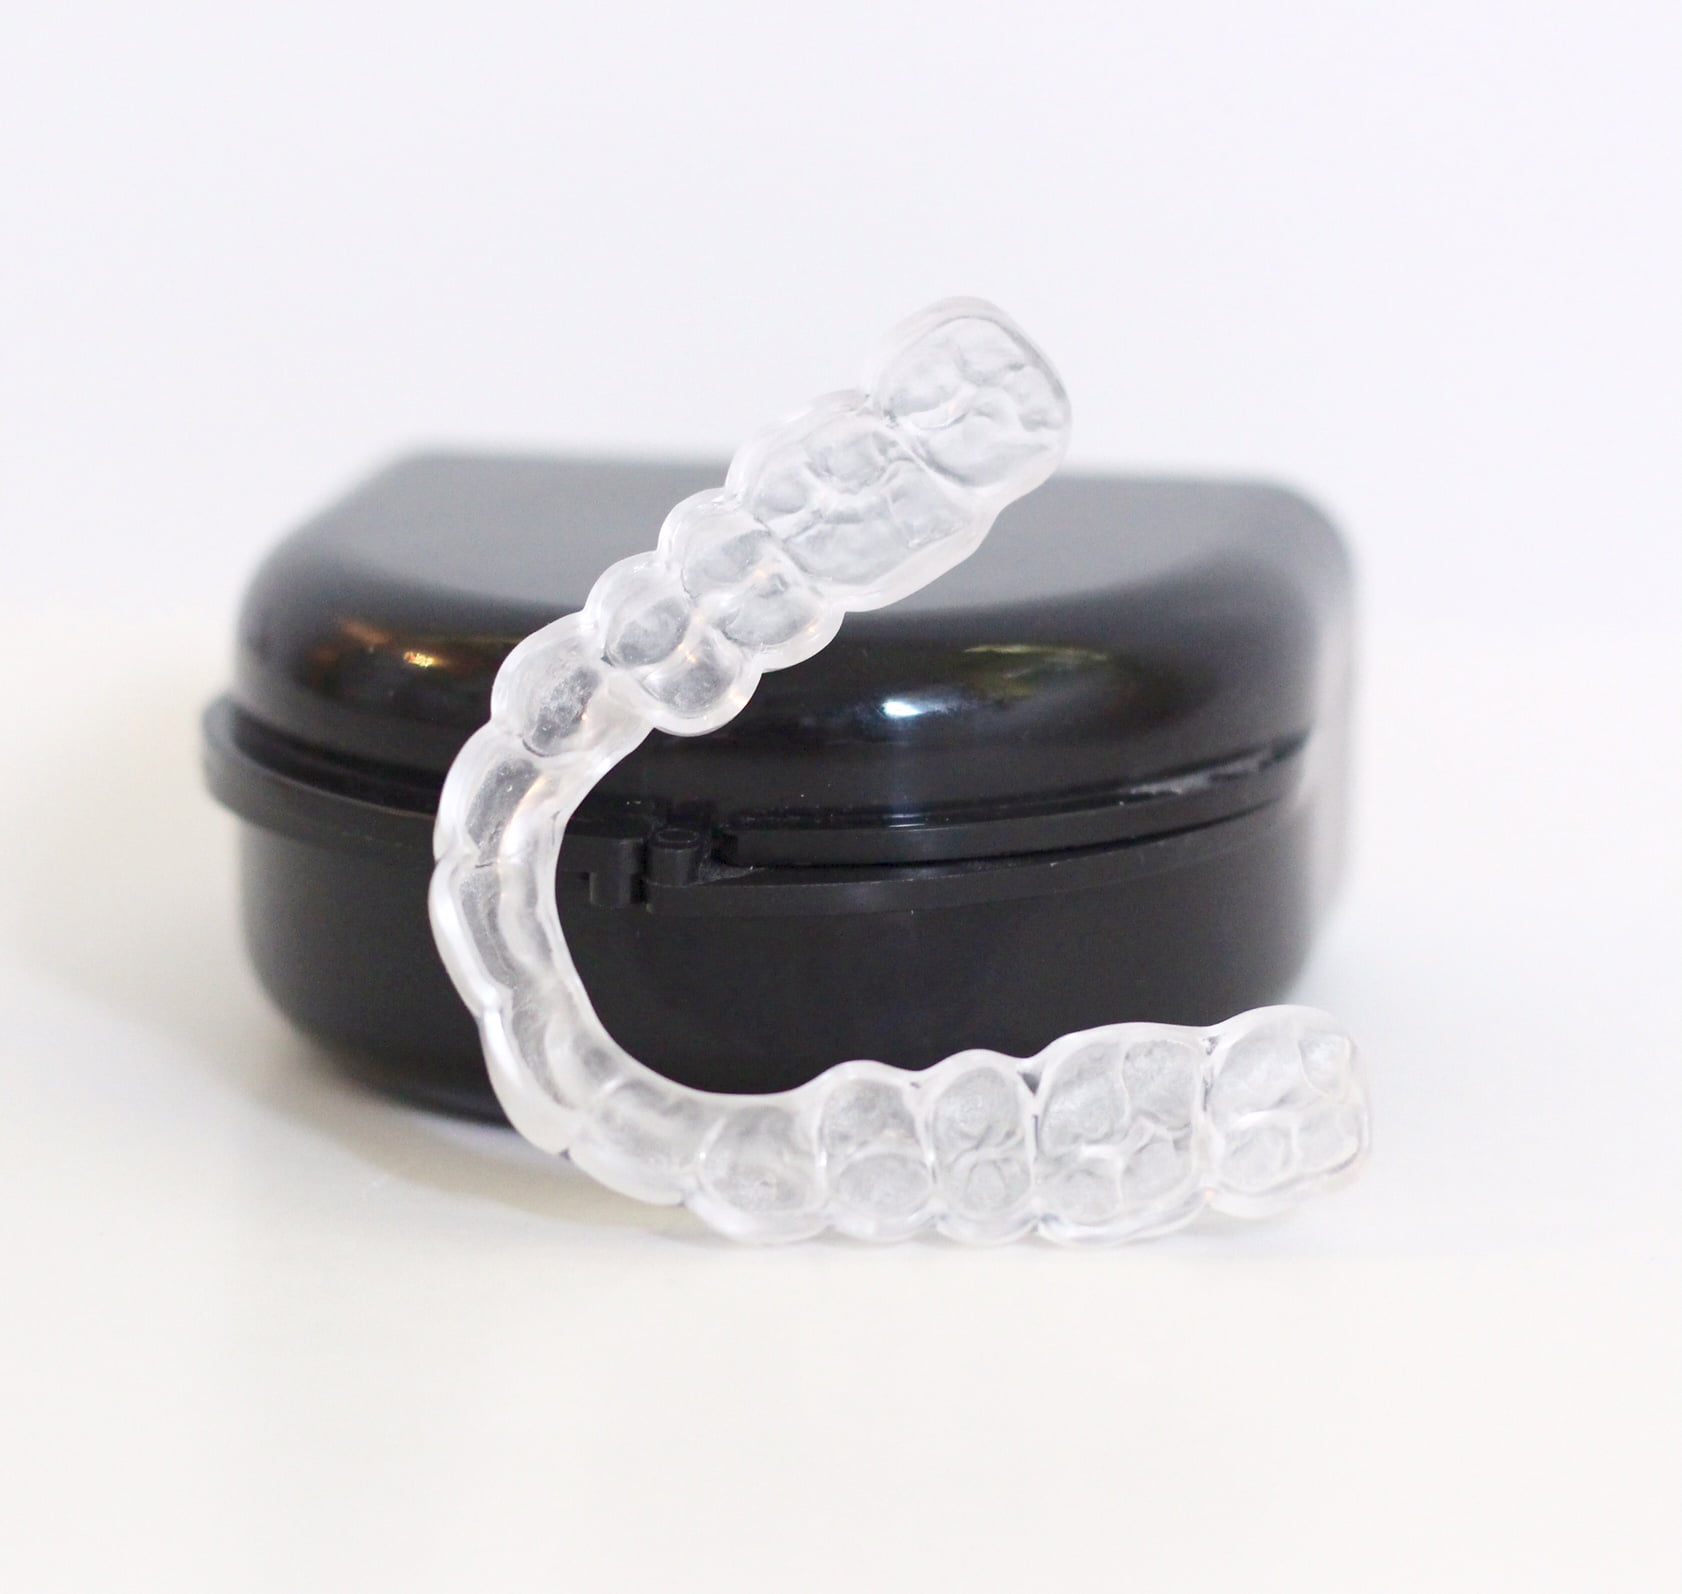 Night Mouth Guards 117